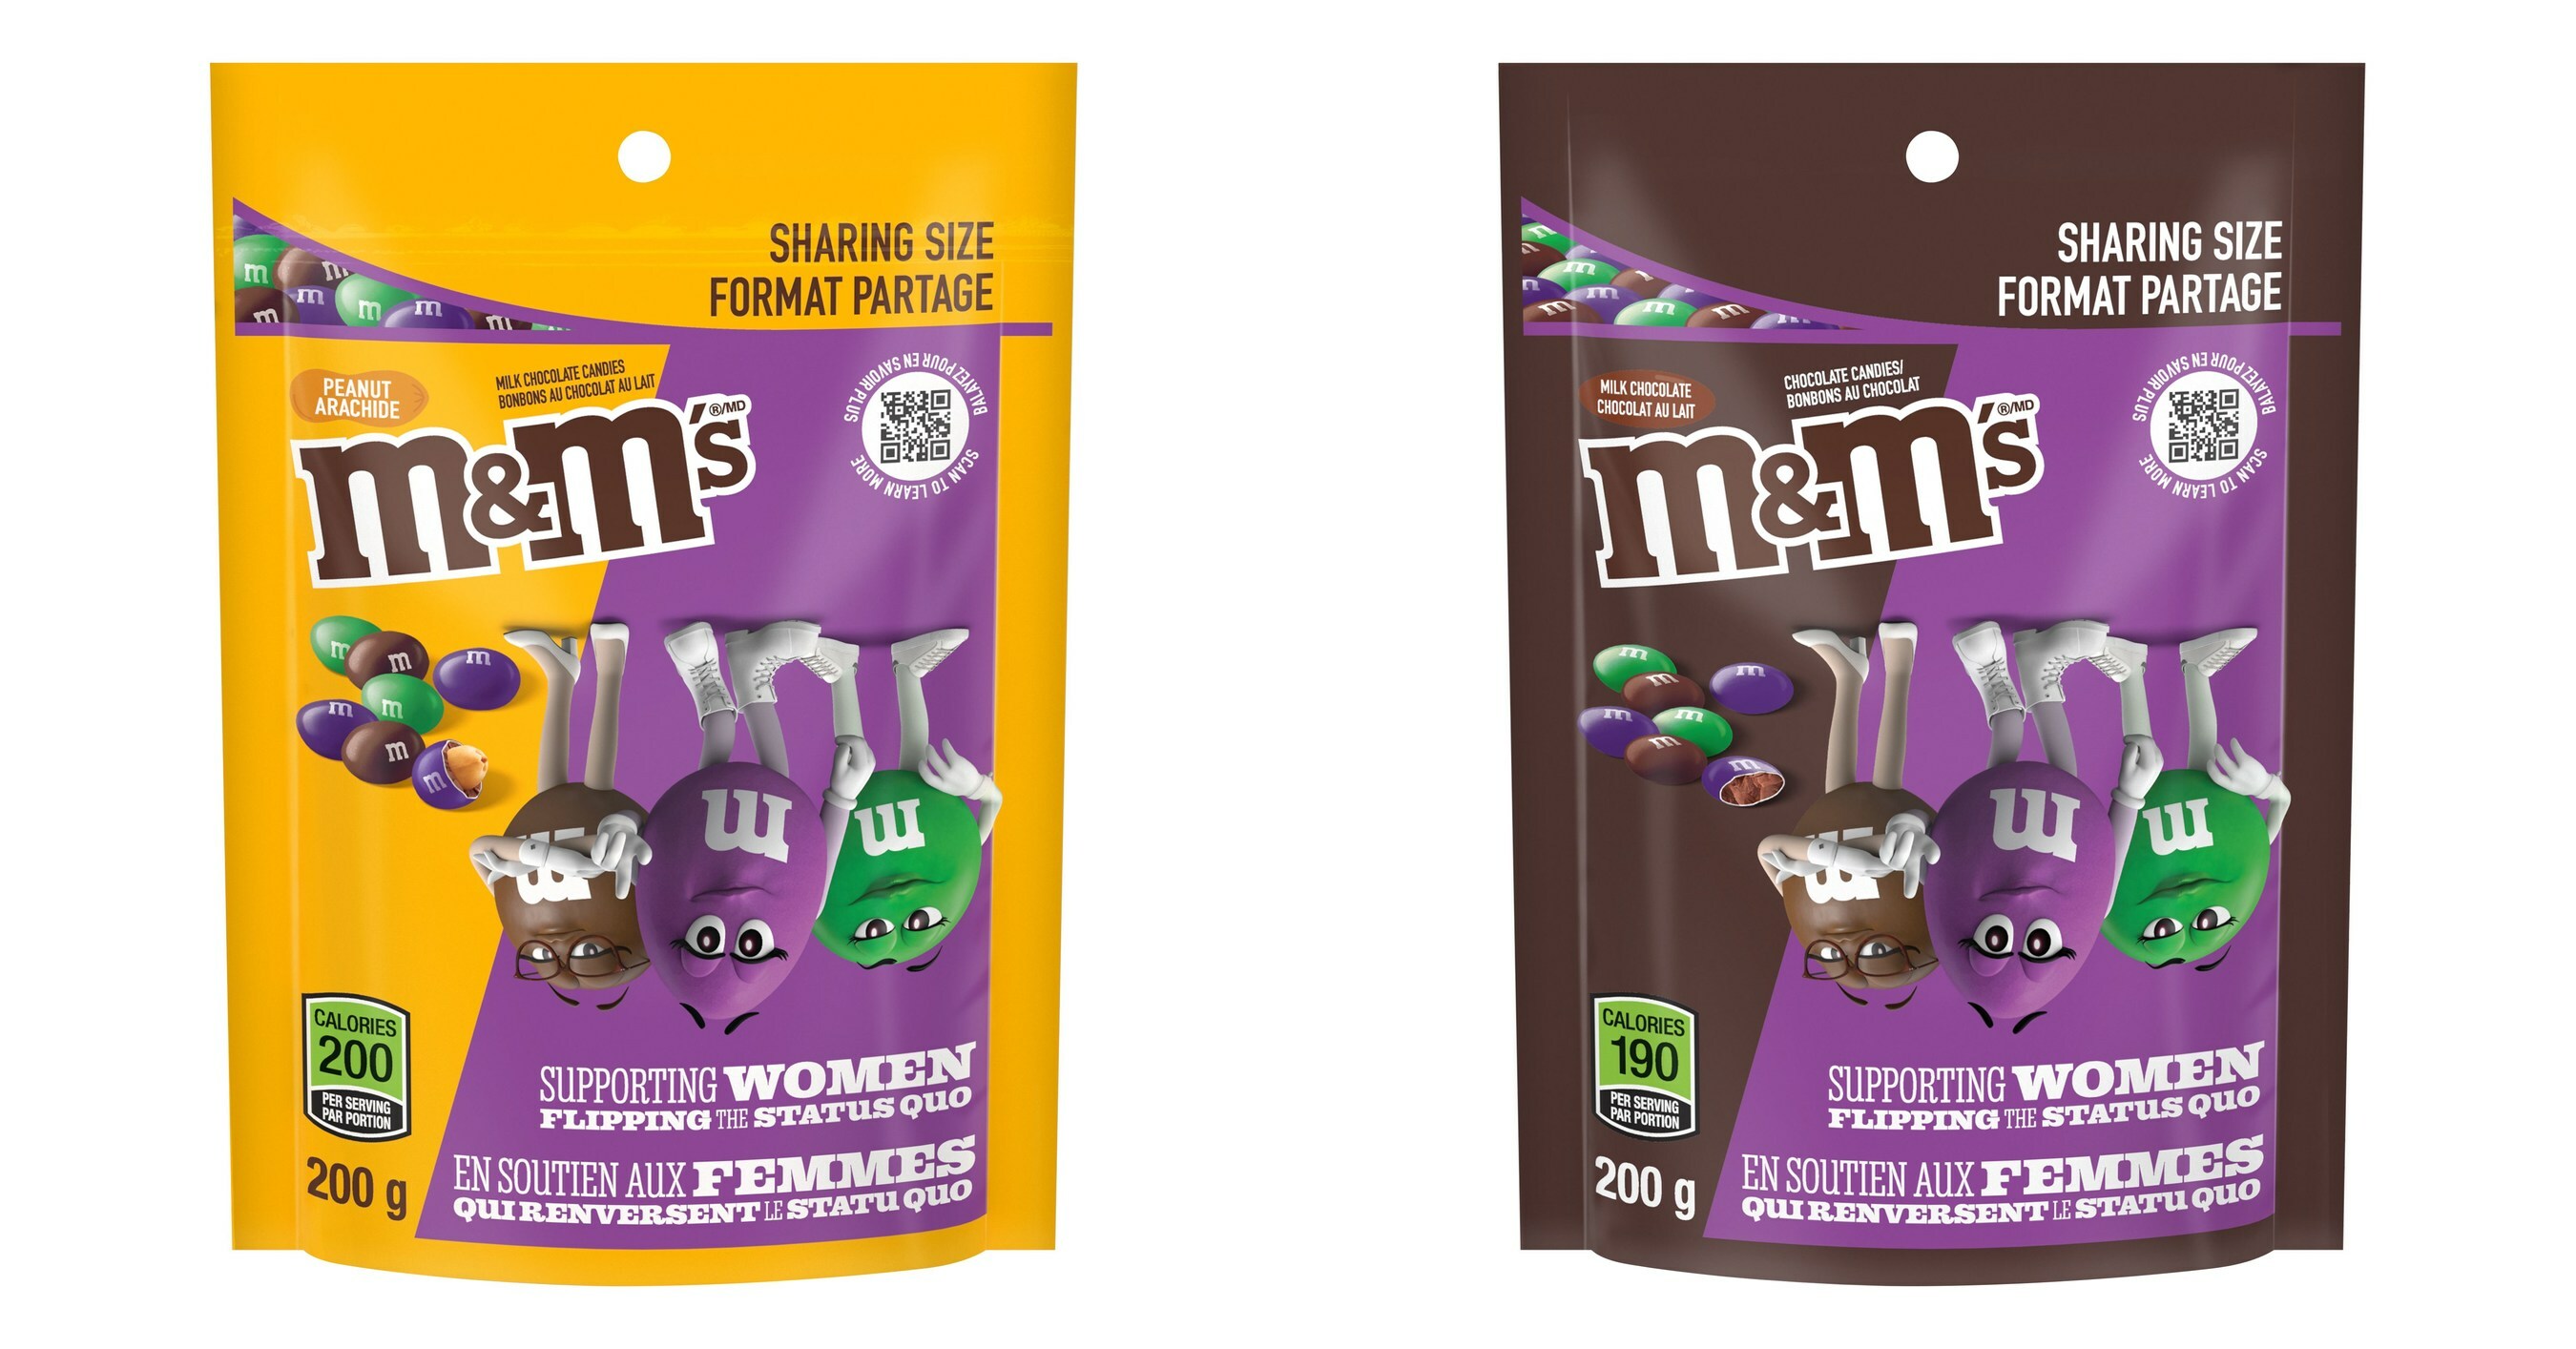 Mars Wrigley launches second M&M'S Flavor Vote in Canada